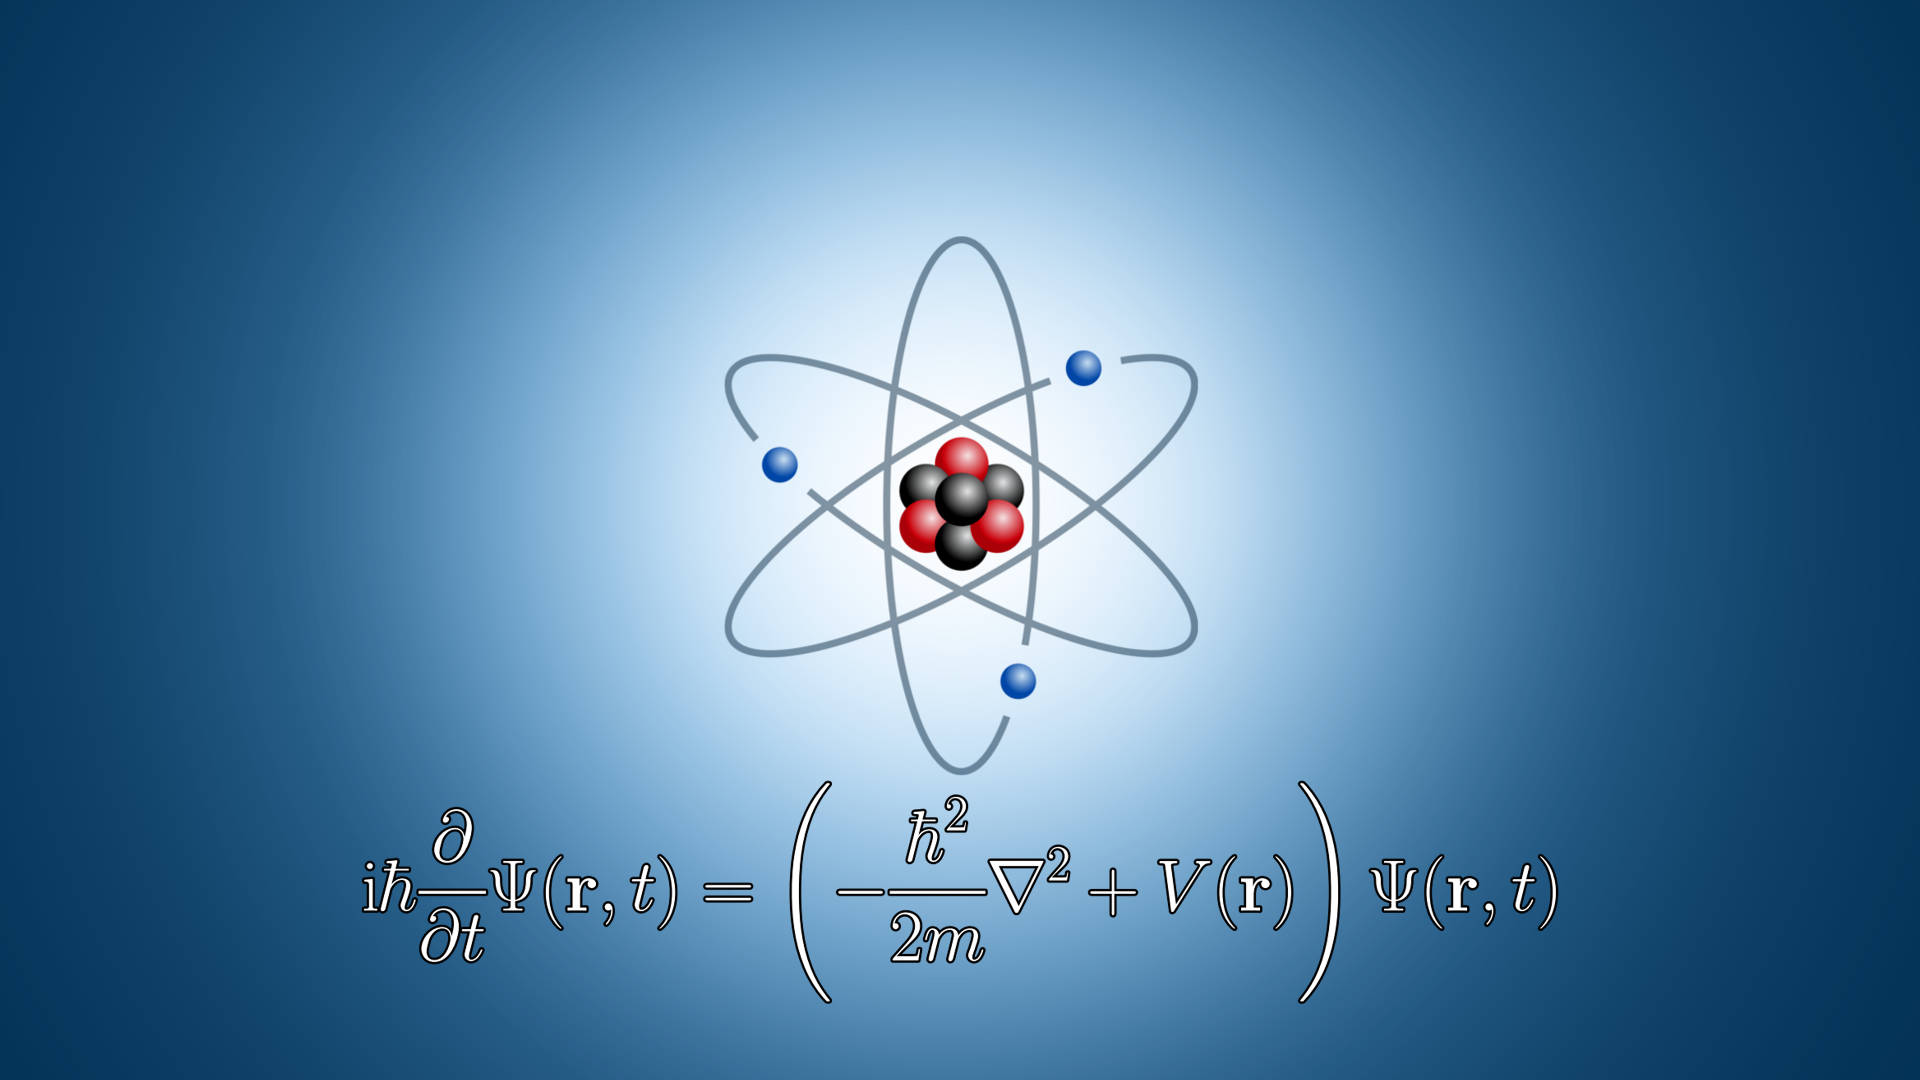 Free Physics Wallpaper Downloads, [200+] Physics Wallpapers for FREE |  